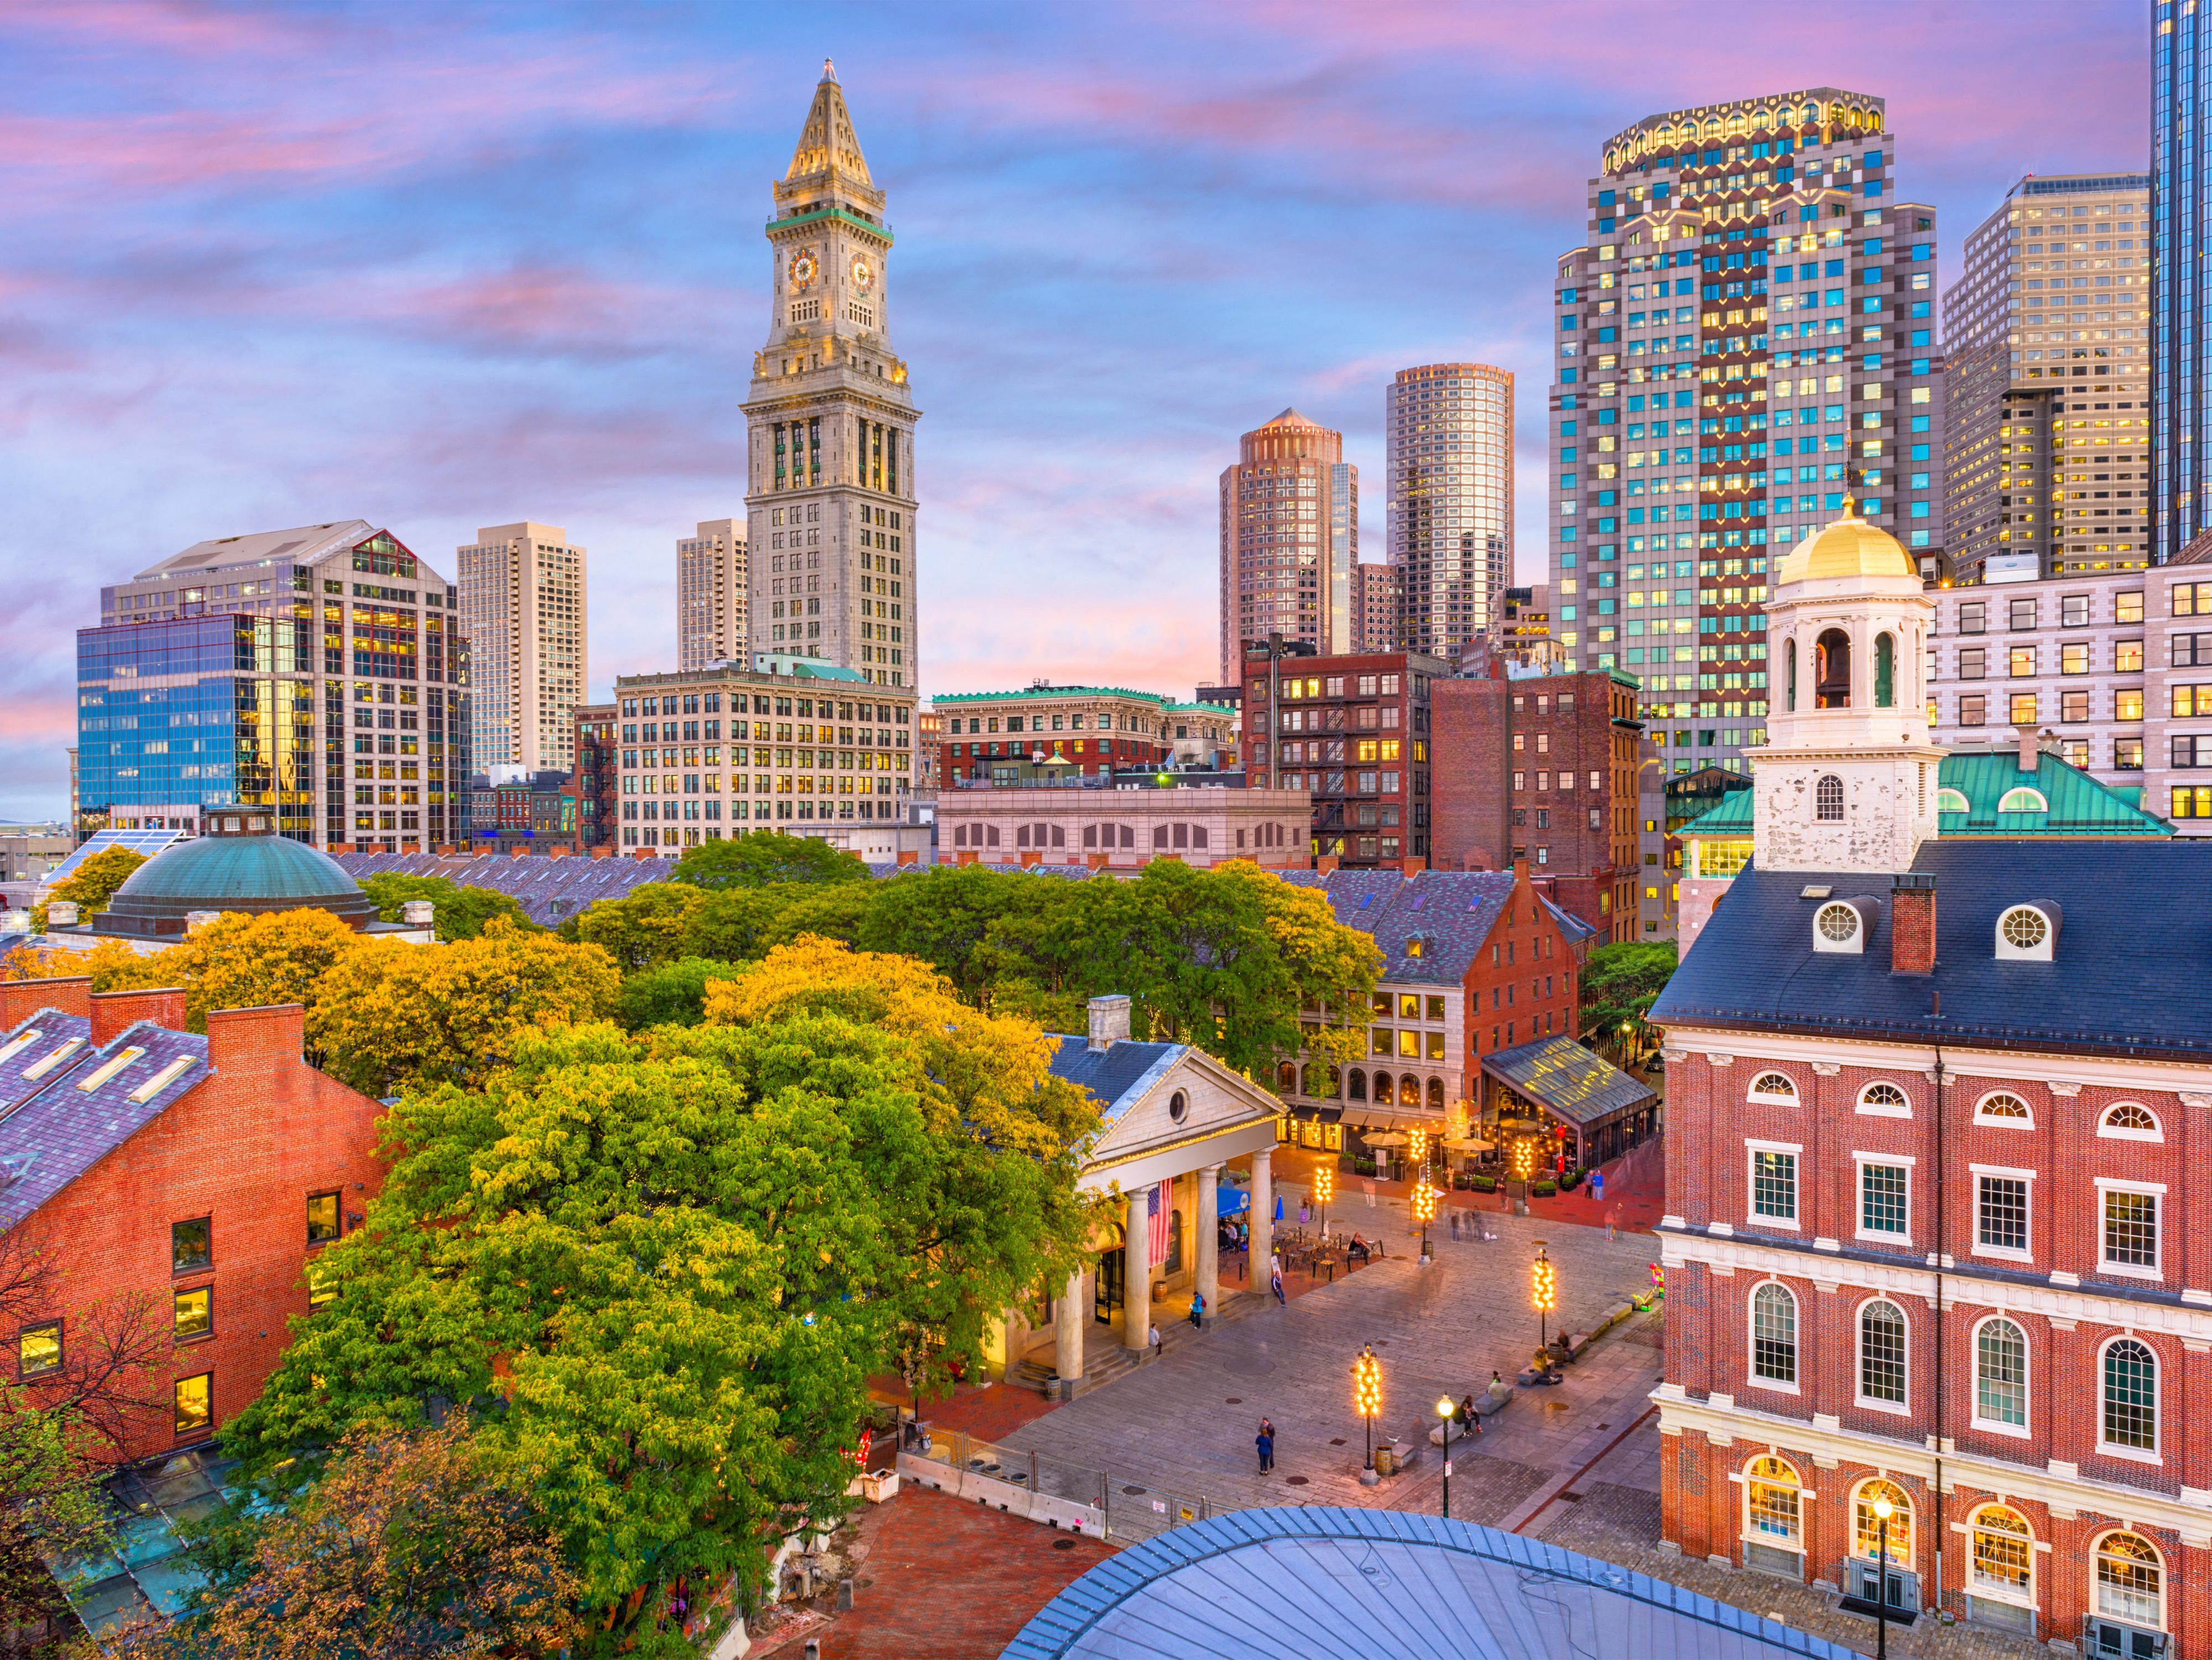 Explore Boston's spring charm with nearby museums like the Museum of Science and the USS Constitution Museum and Ship. Hop on our hotel’s shuttle for seamless access to local gems. Unveil the city's cultural richness and historic treasures effortlessly. 